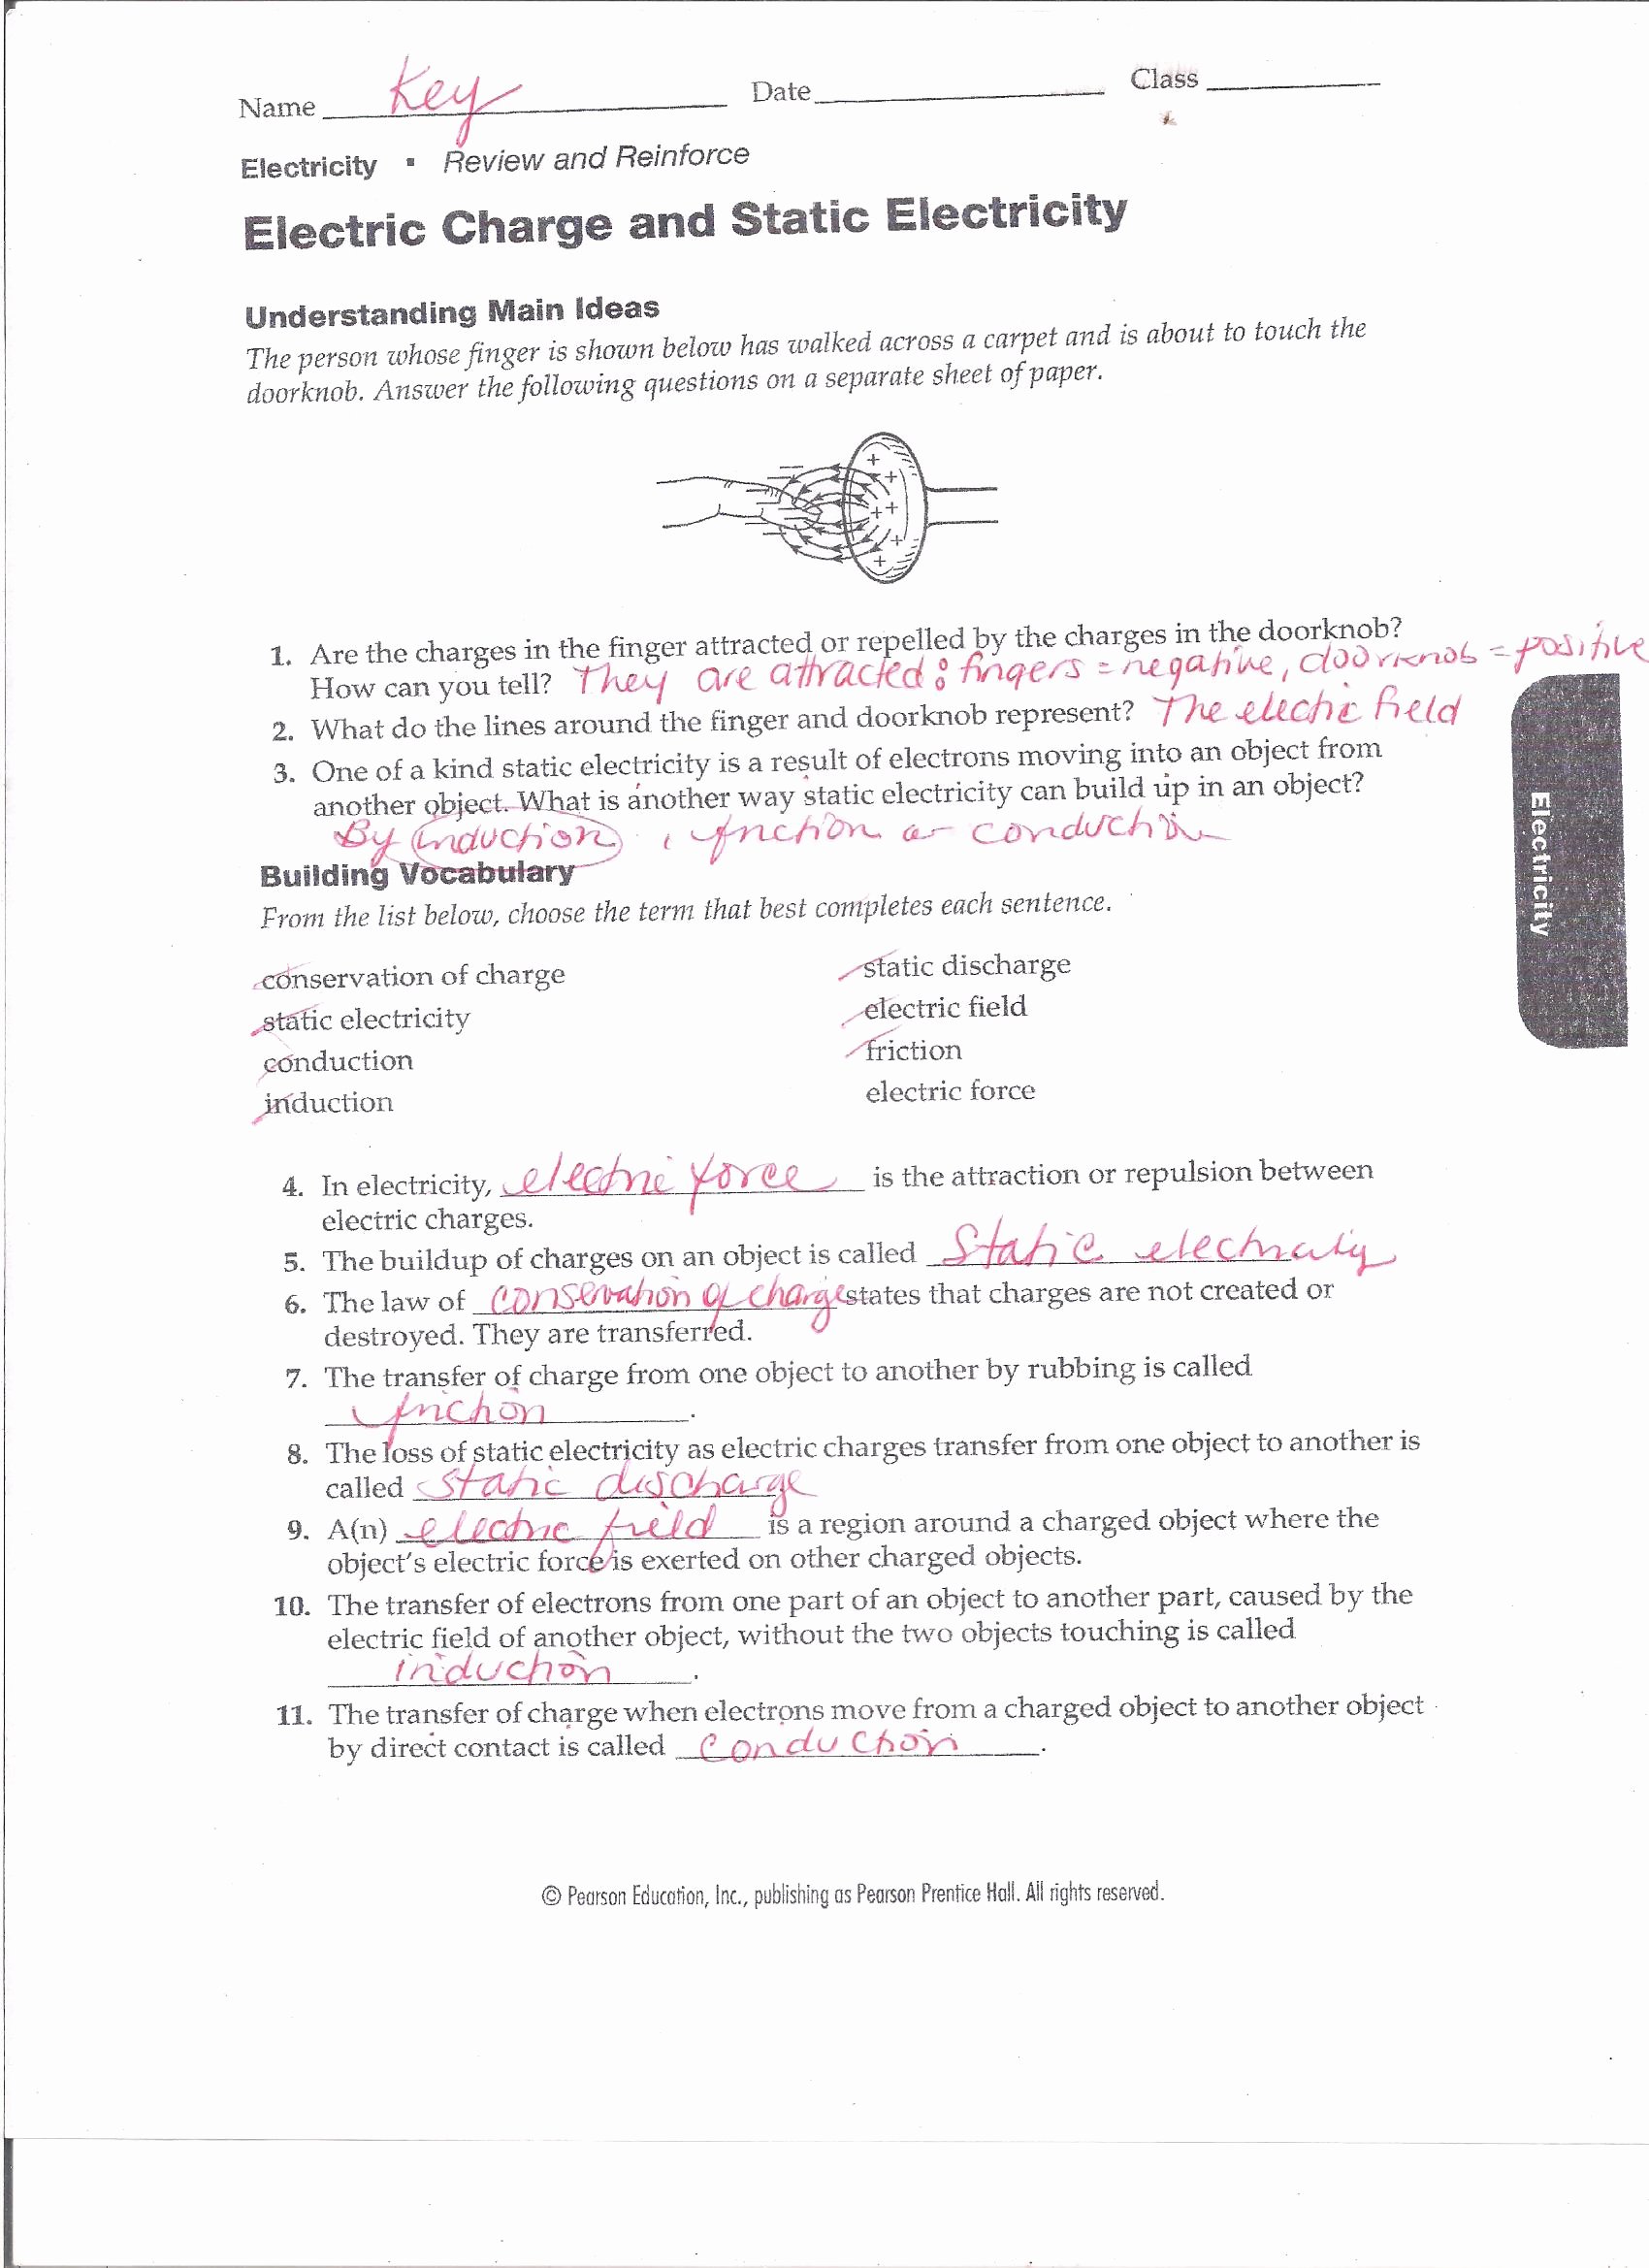 Charge and Electricity Worksheet Answers Unique Physics Ms Pati at Green Oaks